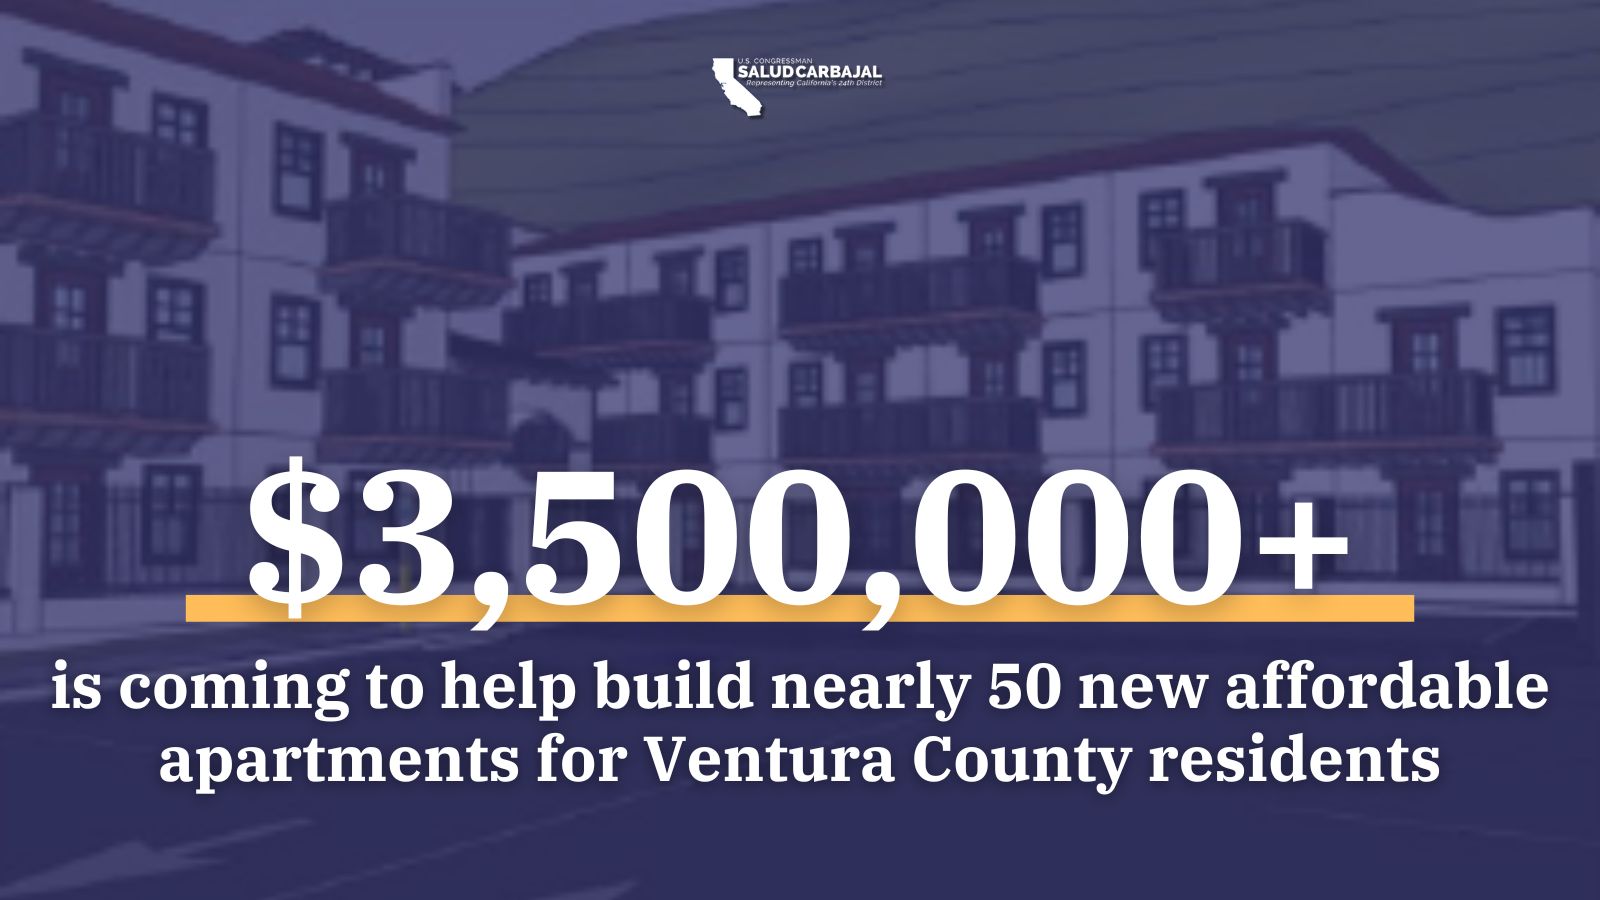 Rep. Carbajal Announces $3.5 Million Federal Award to Fund Nearly 50 New Ventura County Affordable Homes 